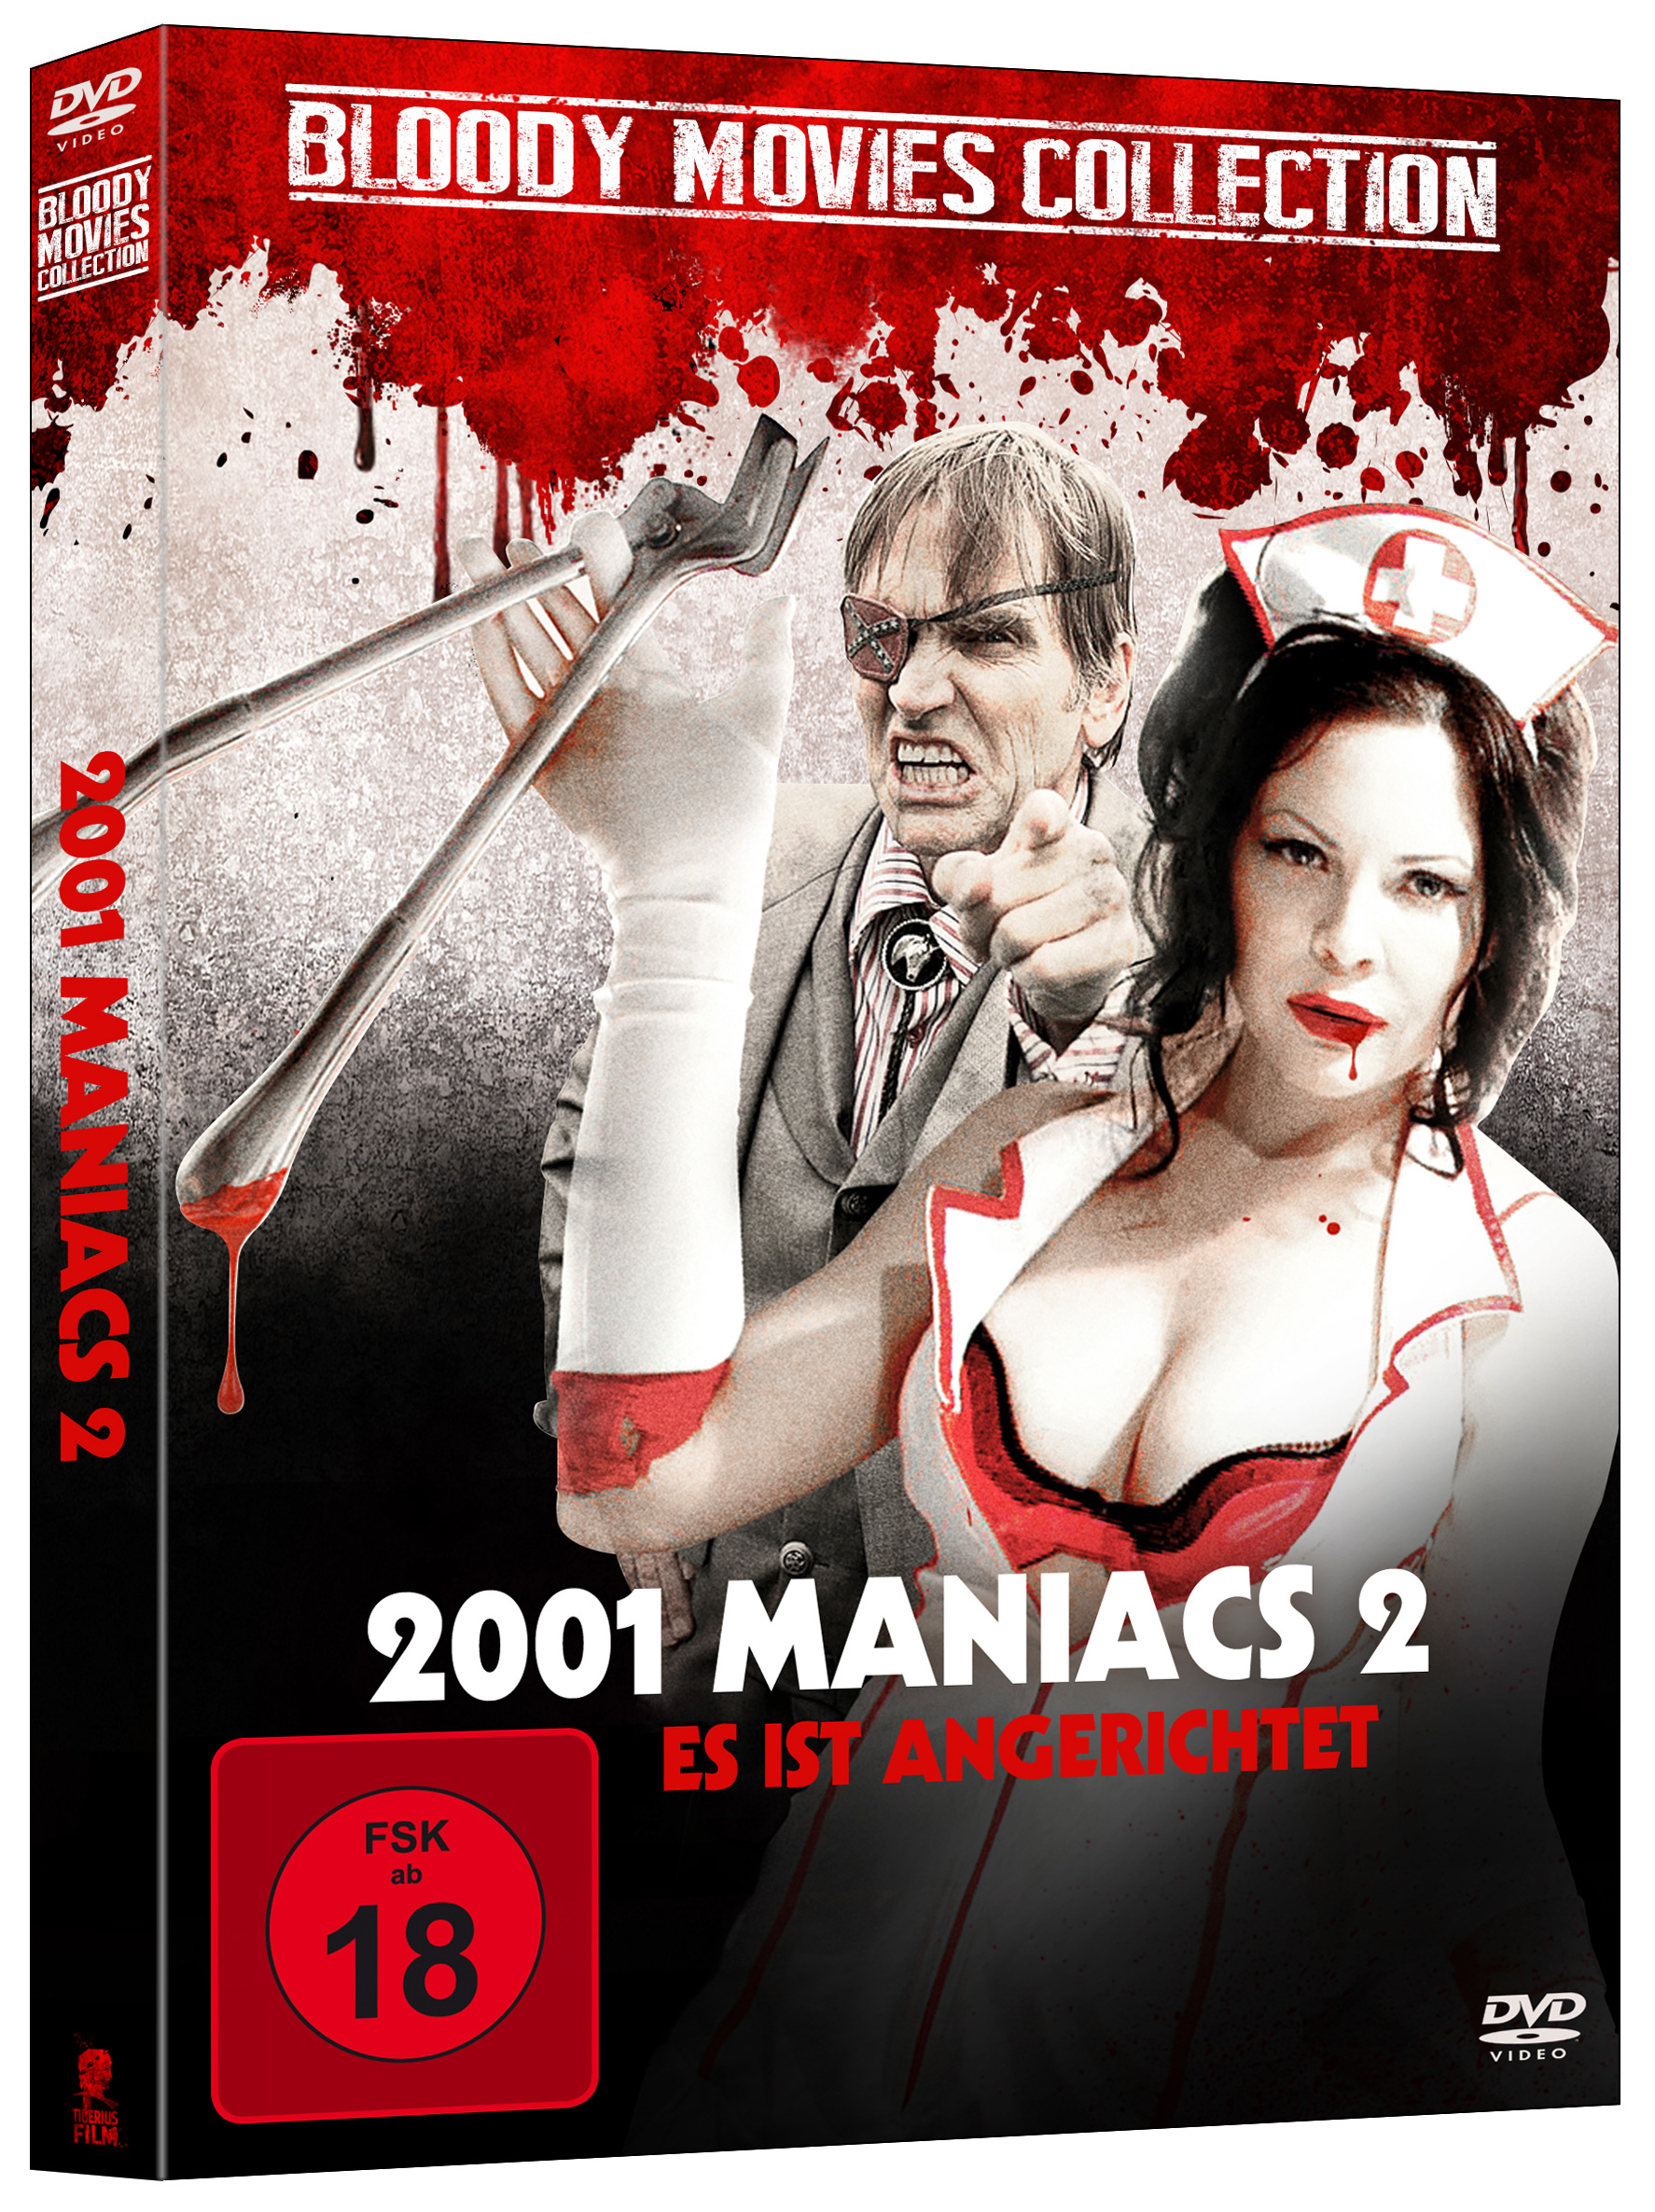 2001 Maniacs 2 (uncut) - Bloody Movies Collection